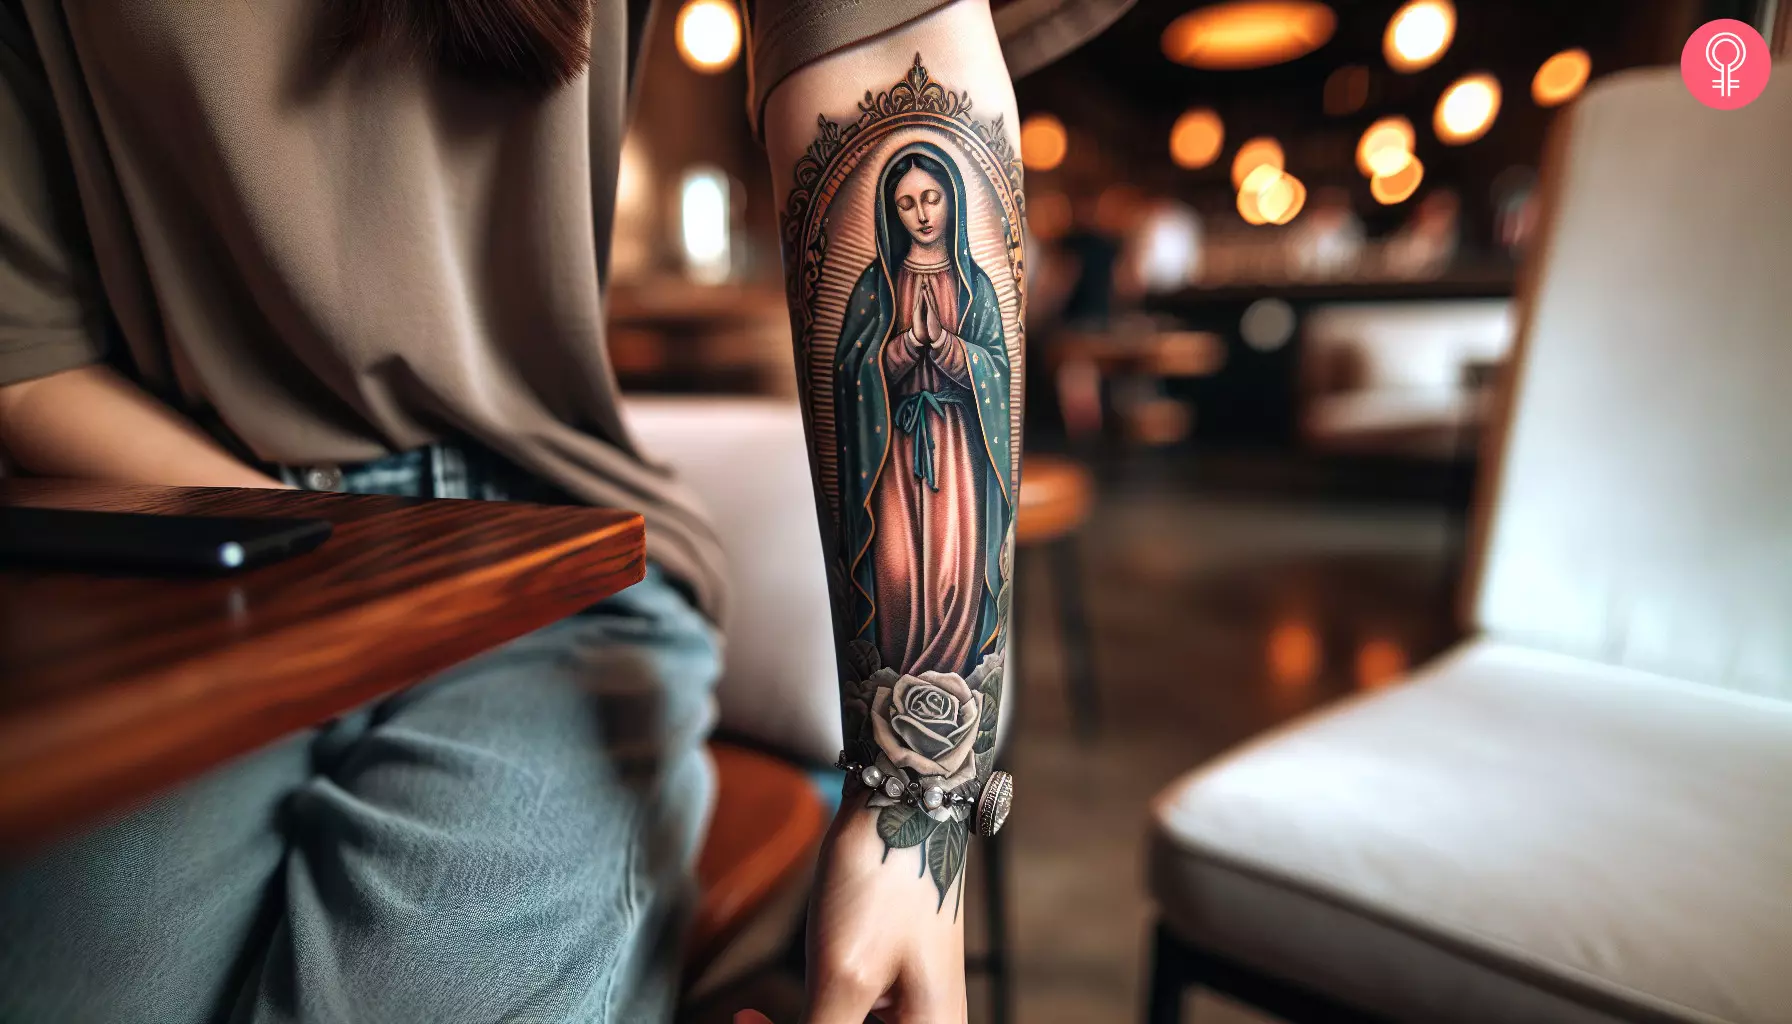 Virgin Mary tattoo design on the forearm of a woman